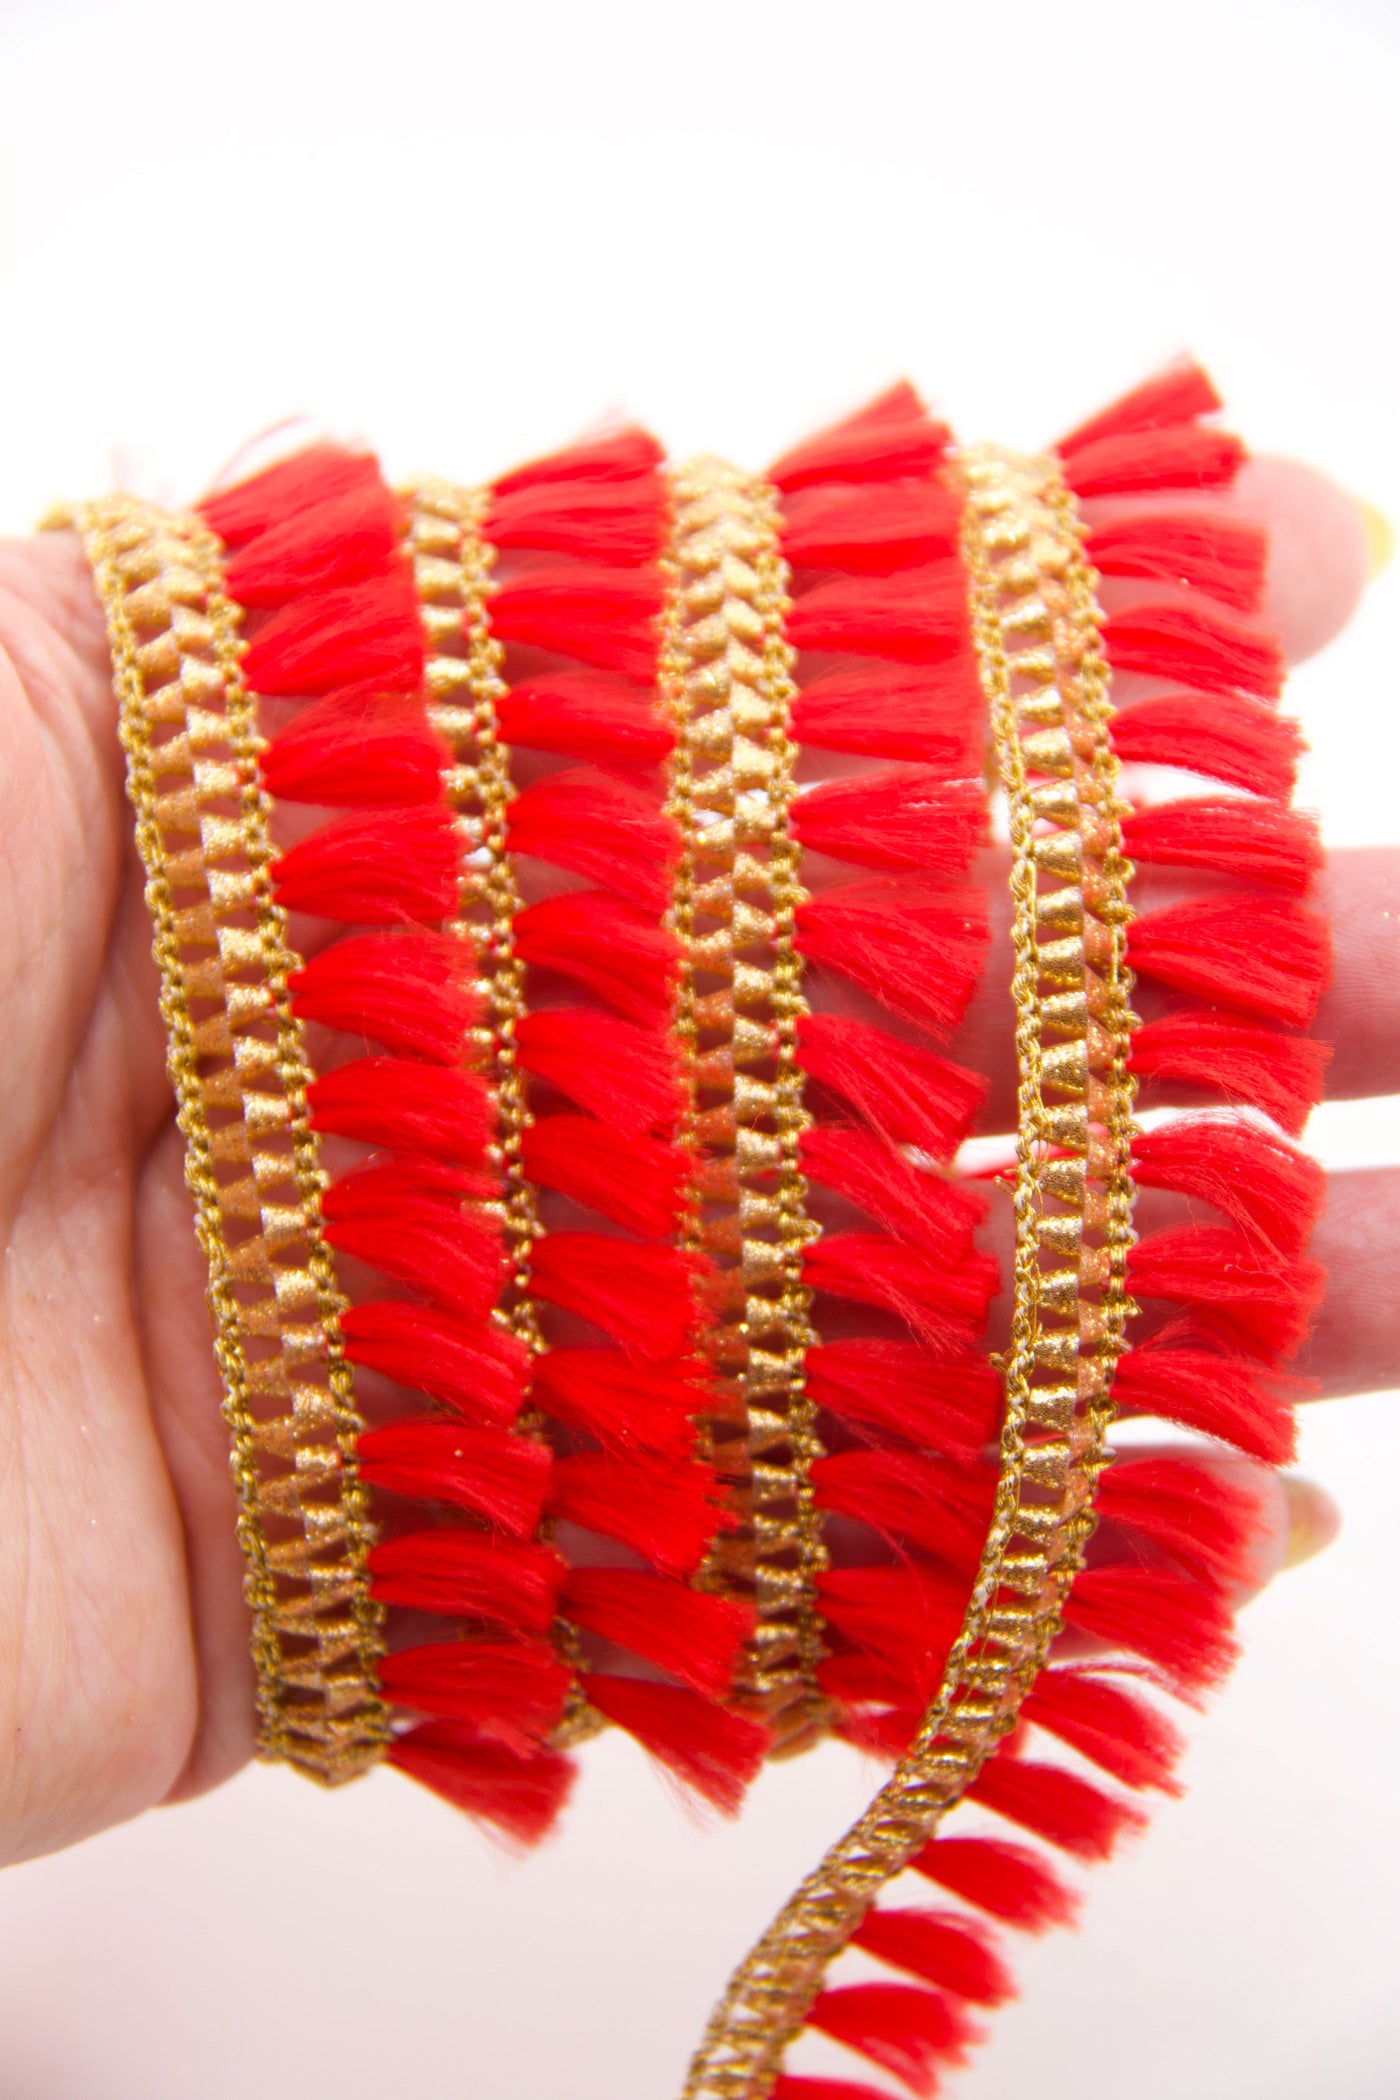 Red Skinny Indian Ribbon, Holiday Craft or Jewelry Supplies, Tassels and trim, all in one